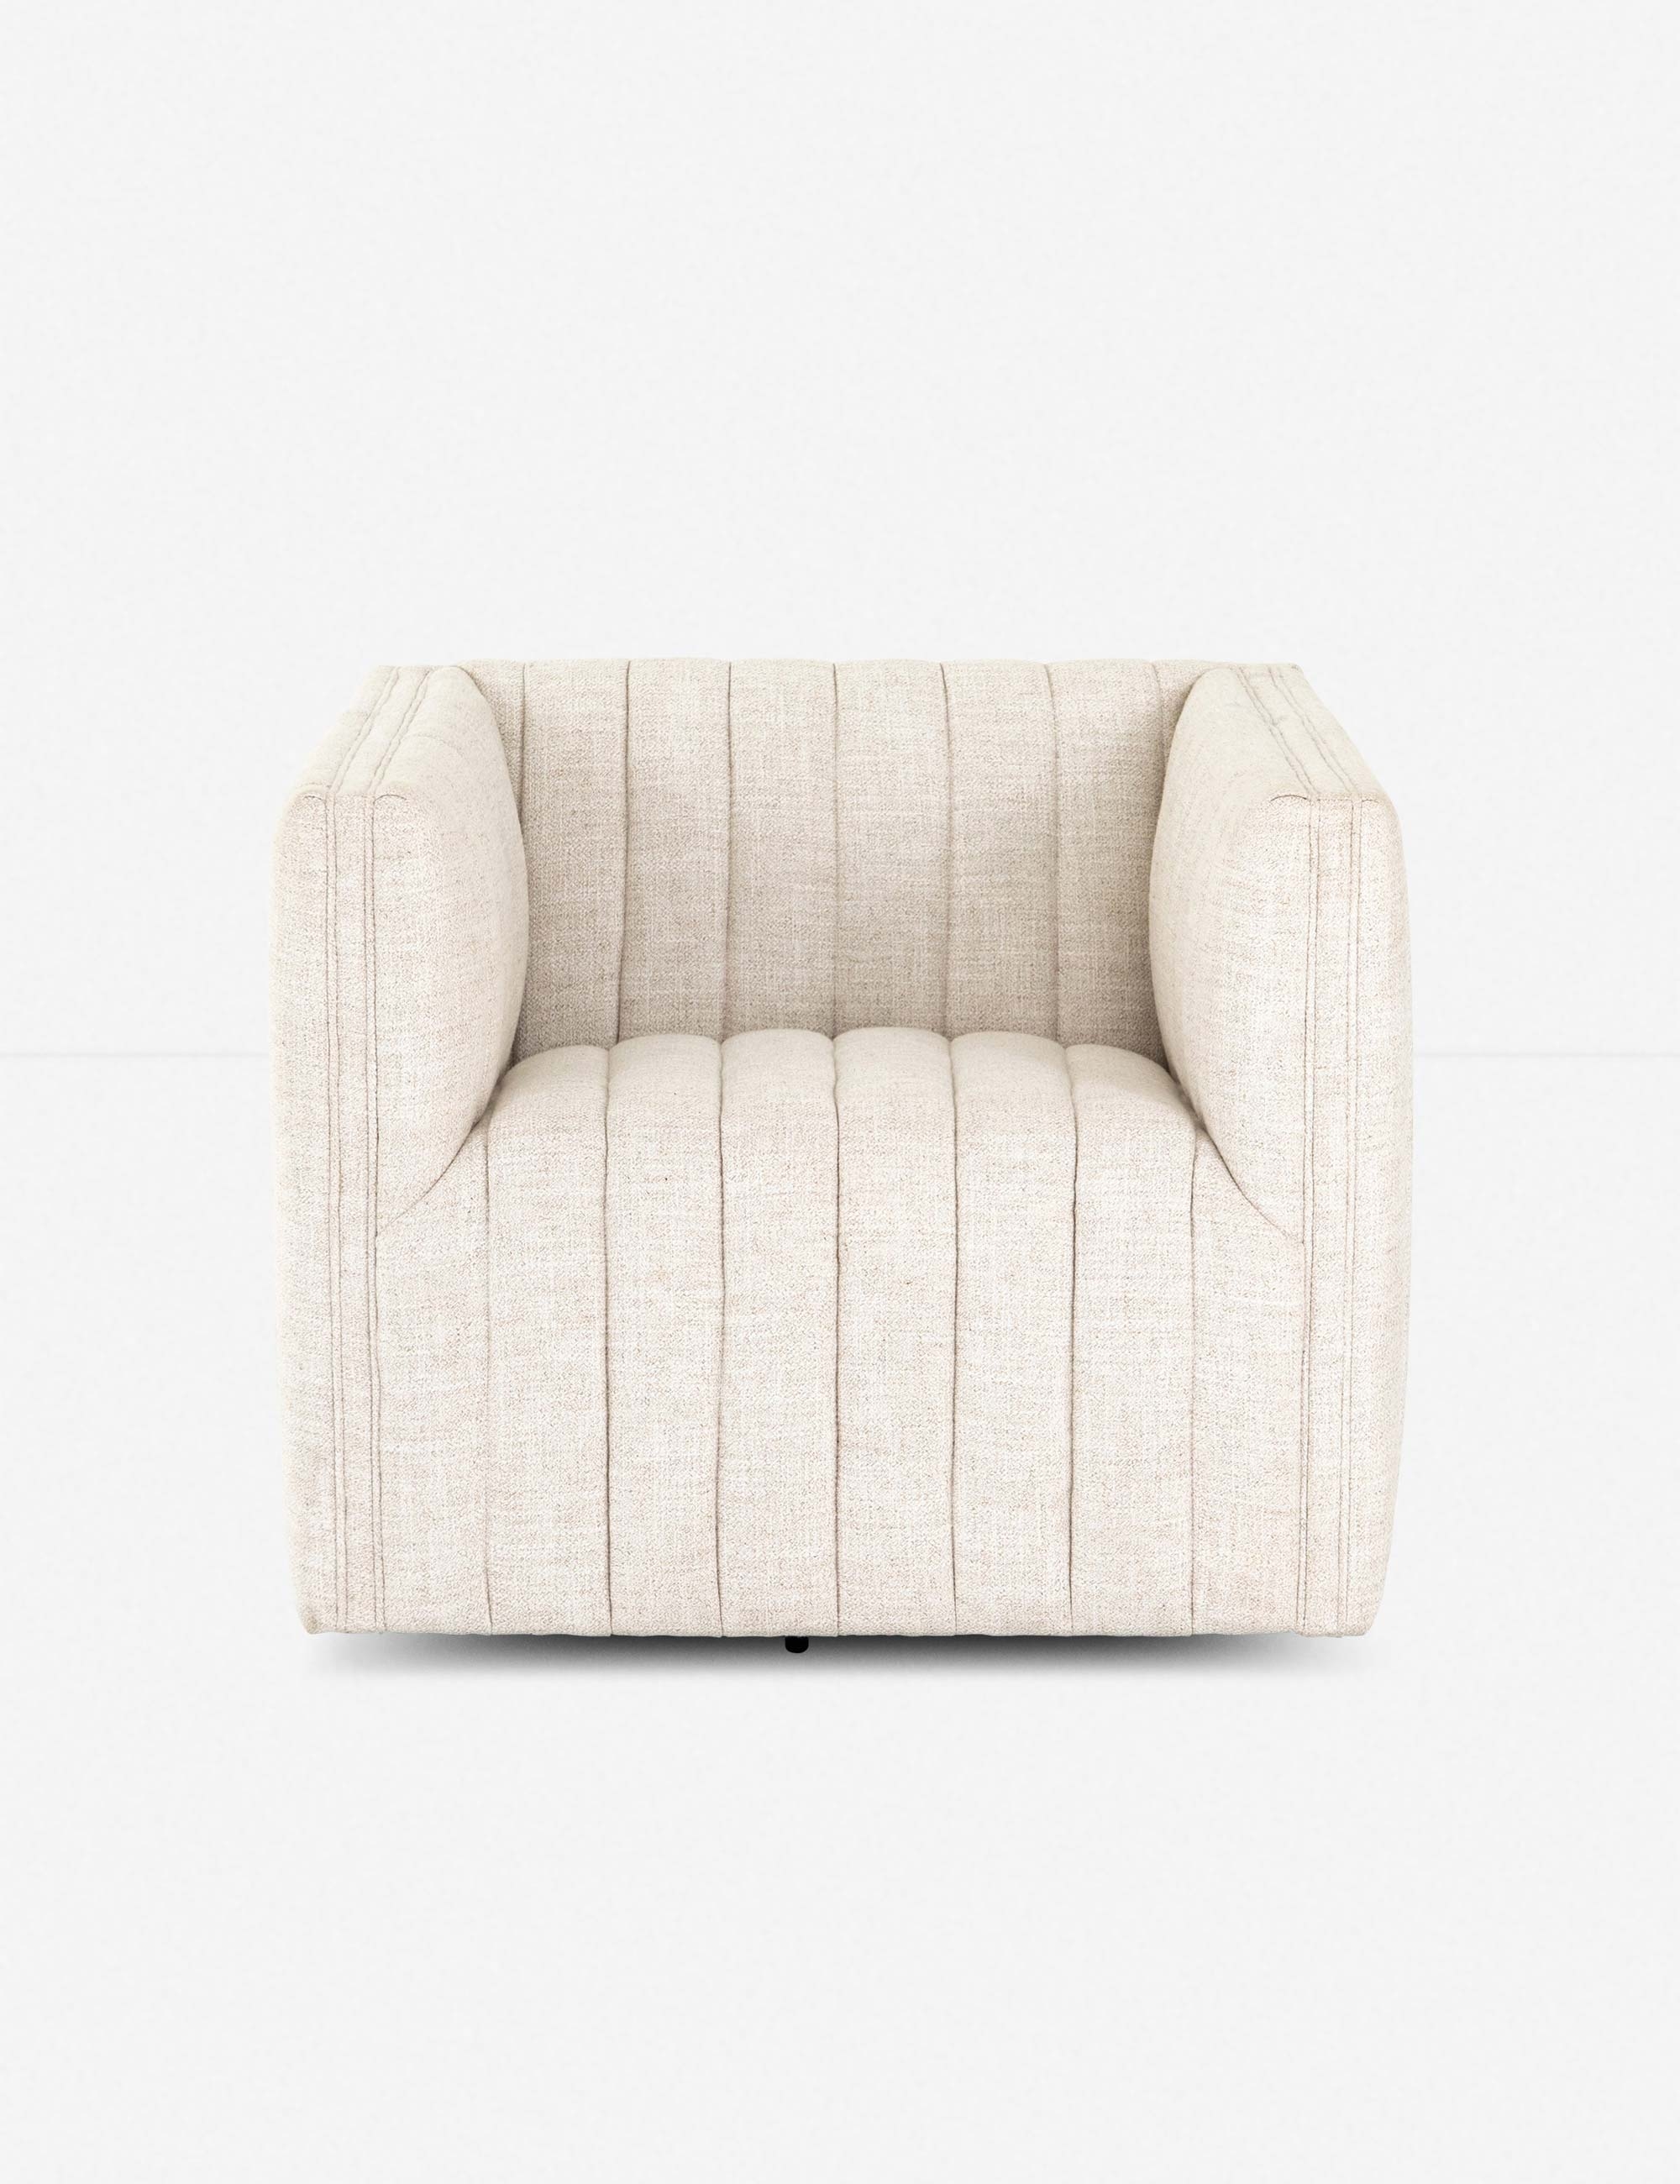 Roz Swivel Chair, Dover Crescent - Image 0